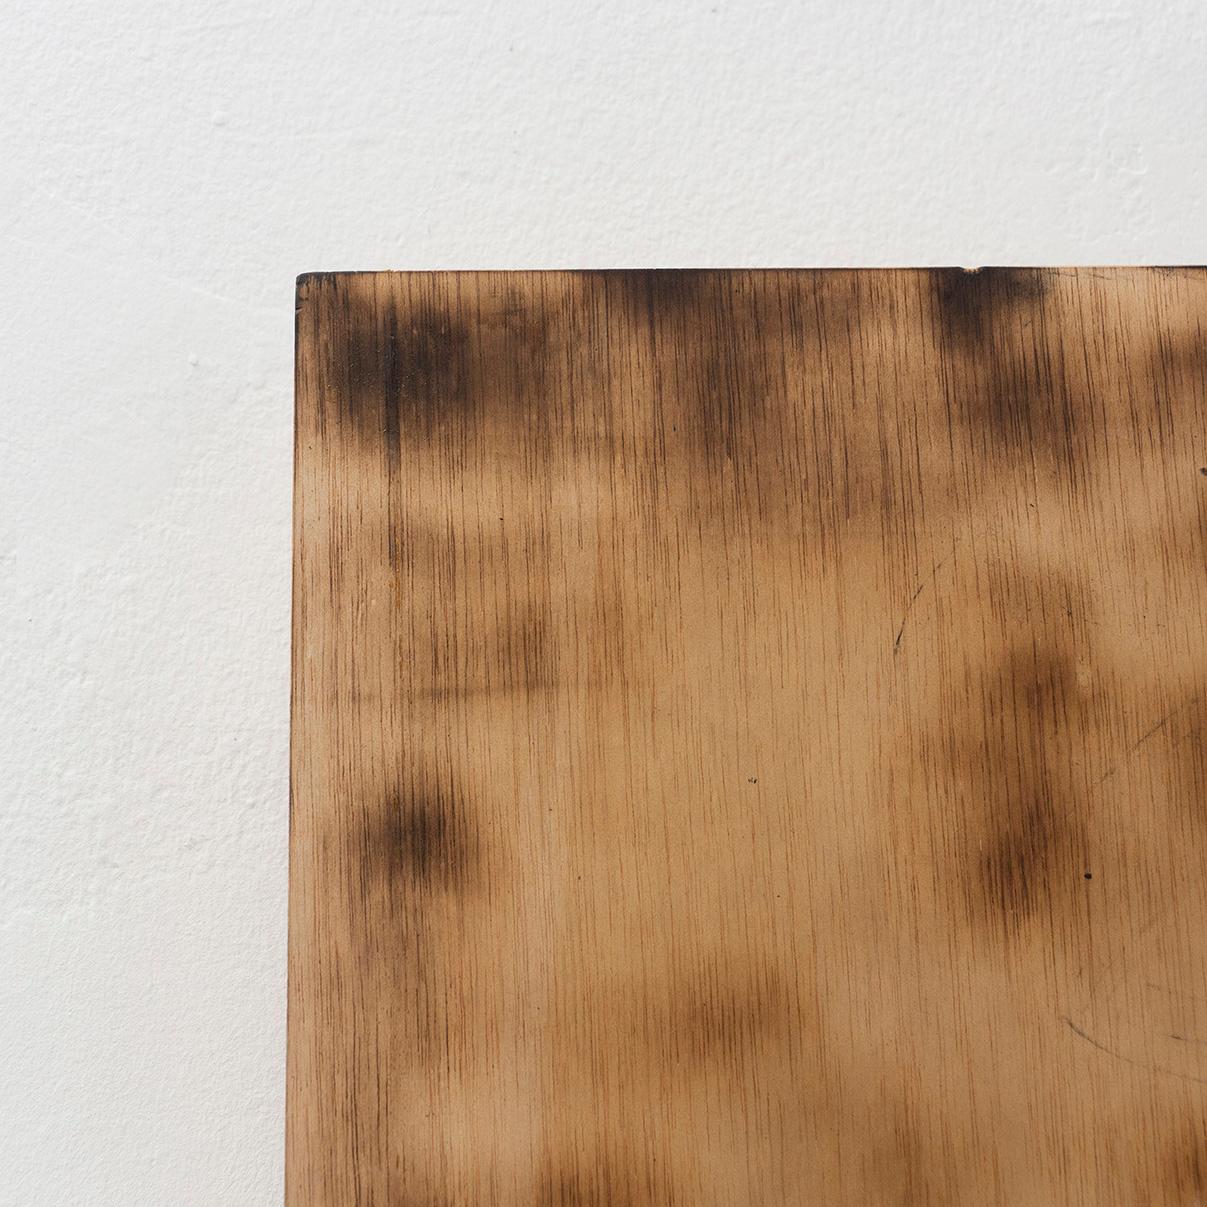 Ramon dels Horts Contemporary Artwork Burned Wood, circa 2018 In Good Condition For Sale In Barcelona, Barcelona